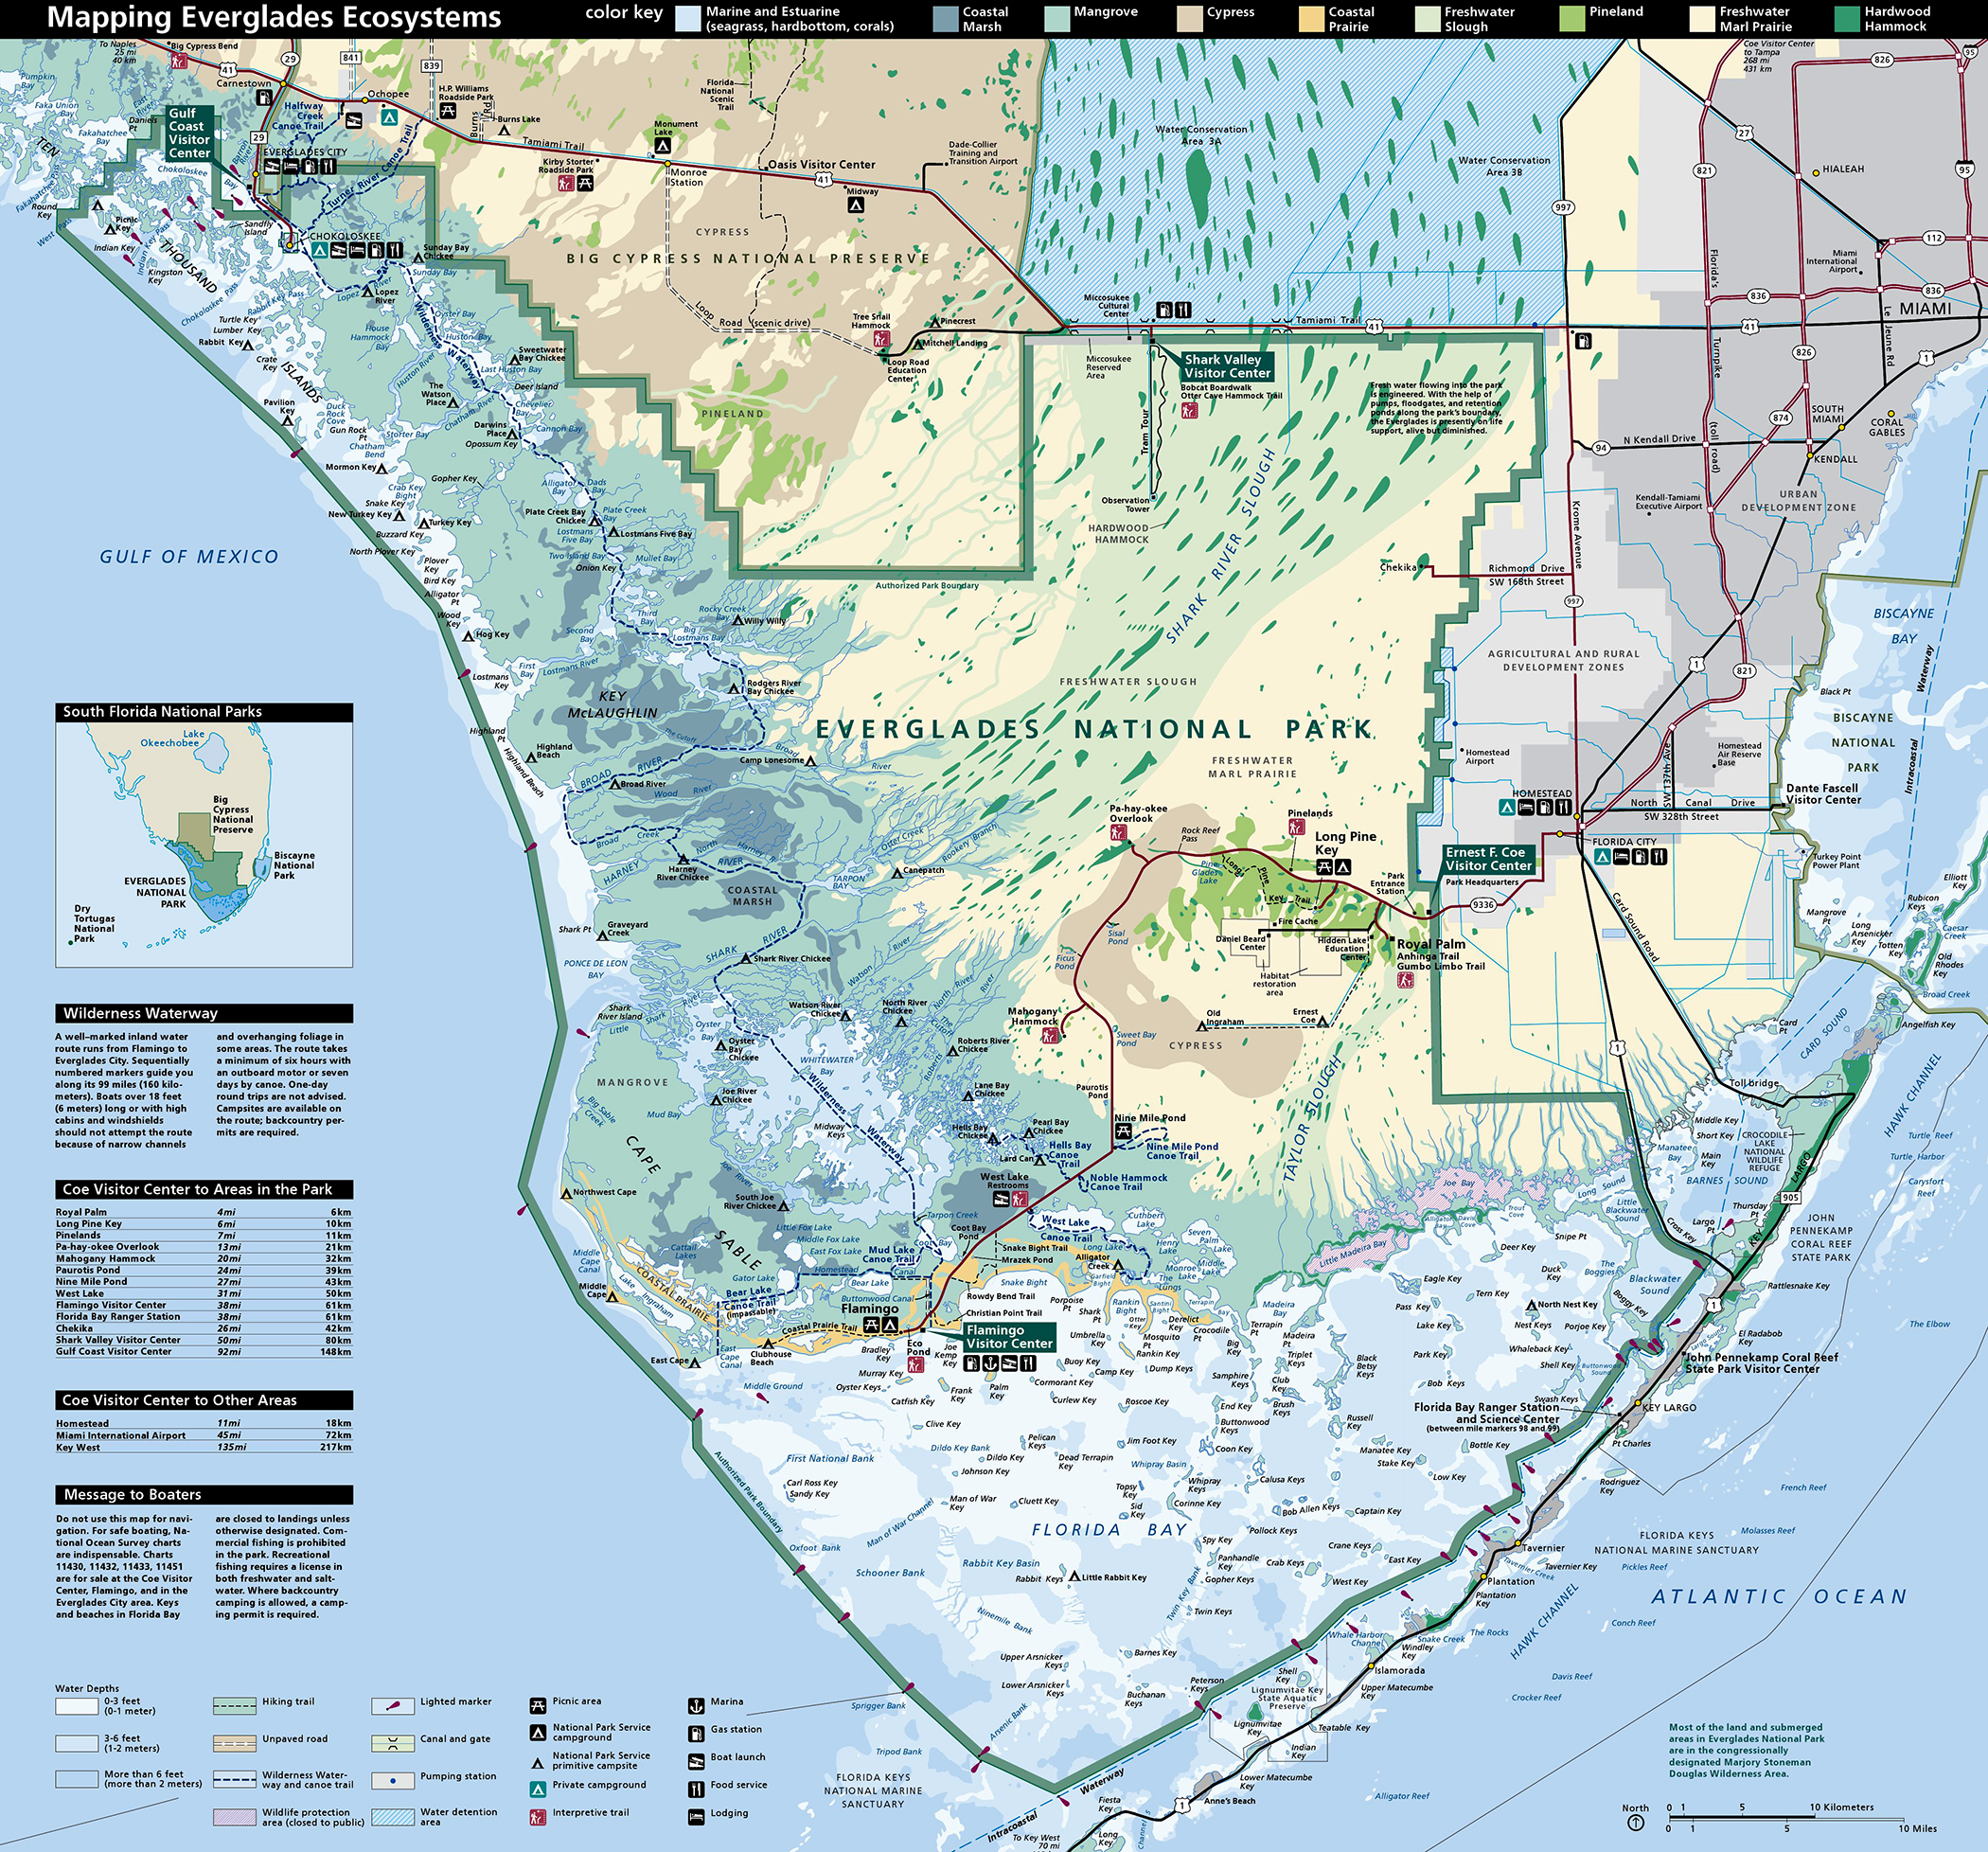 official map of everglades national park
